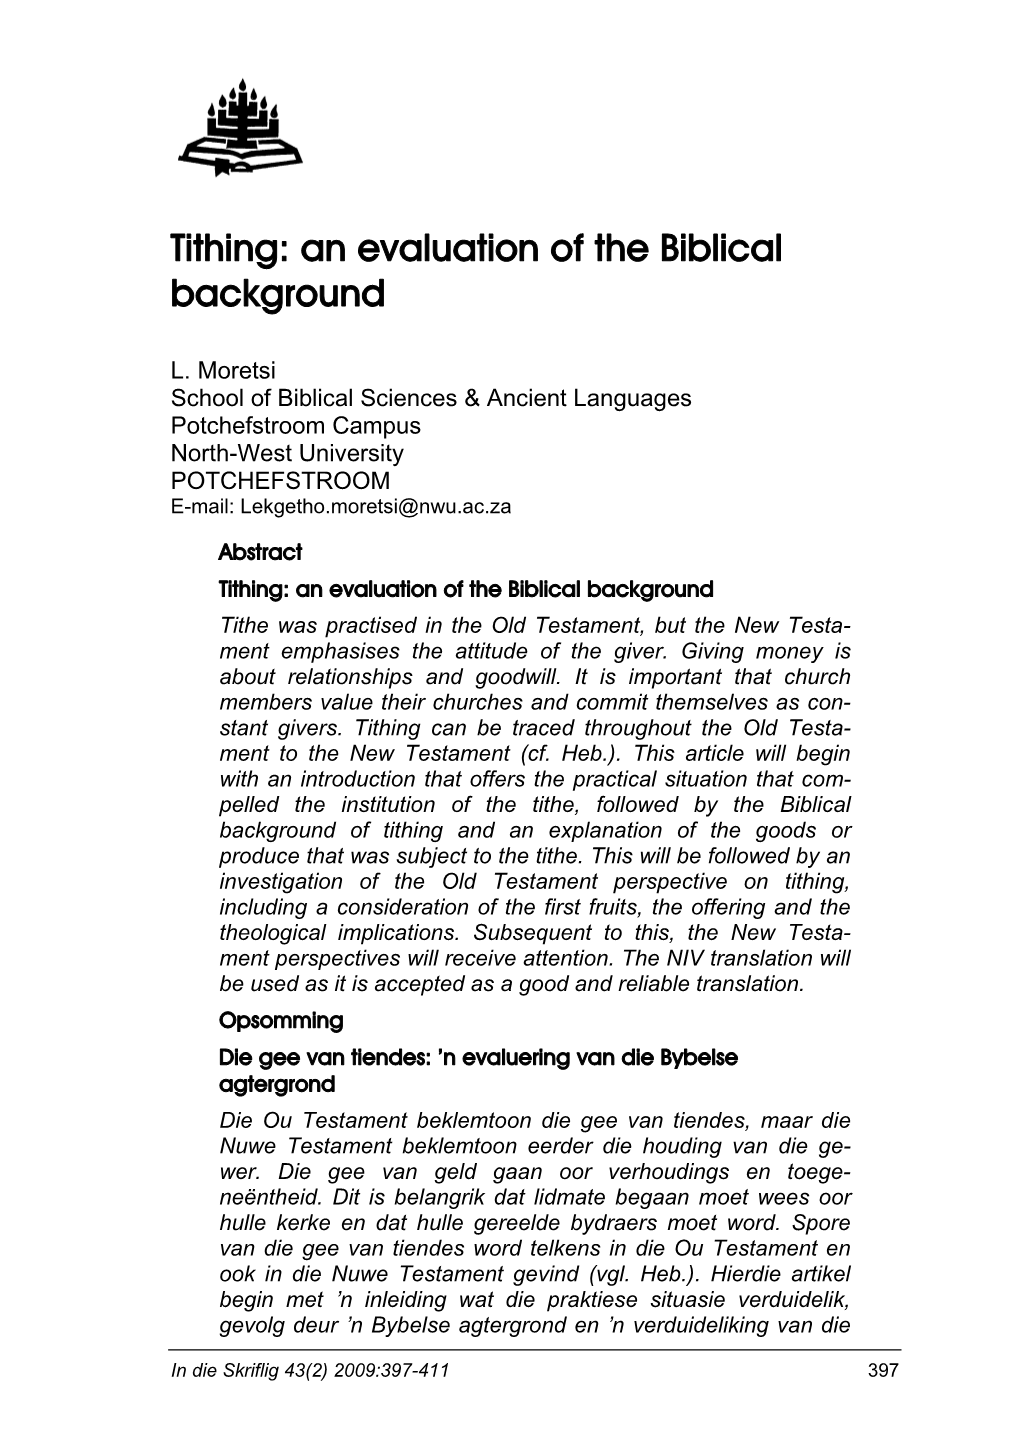 Tithing: an Evaluation of the Biblical Background